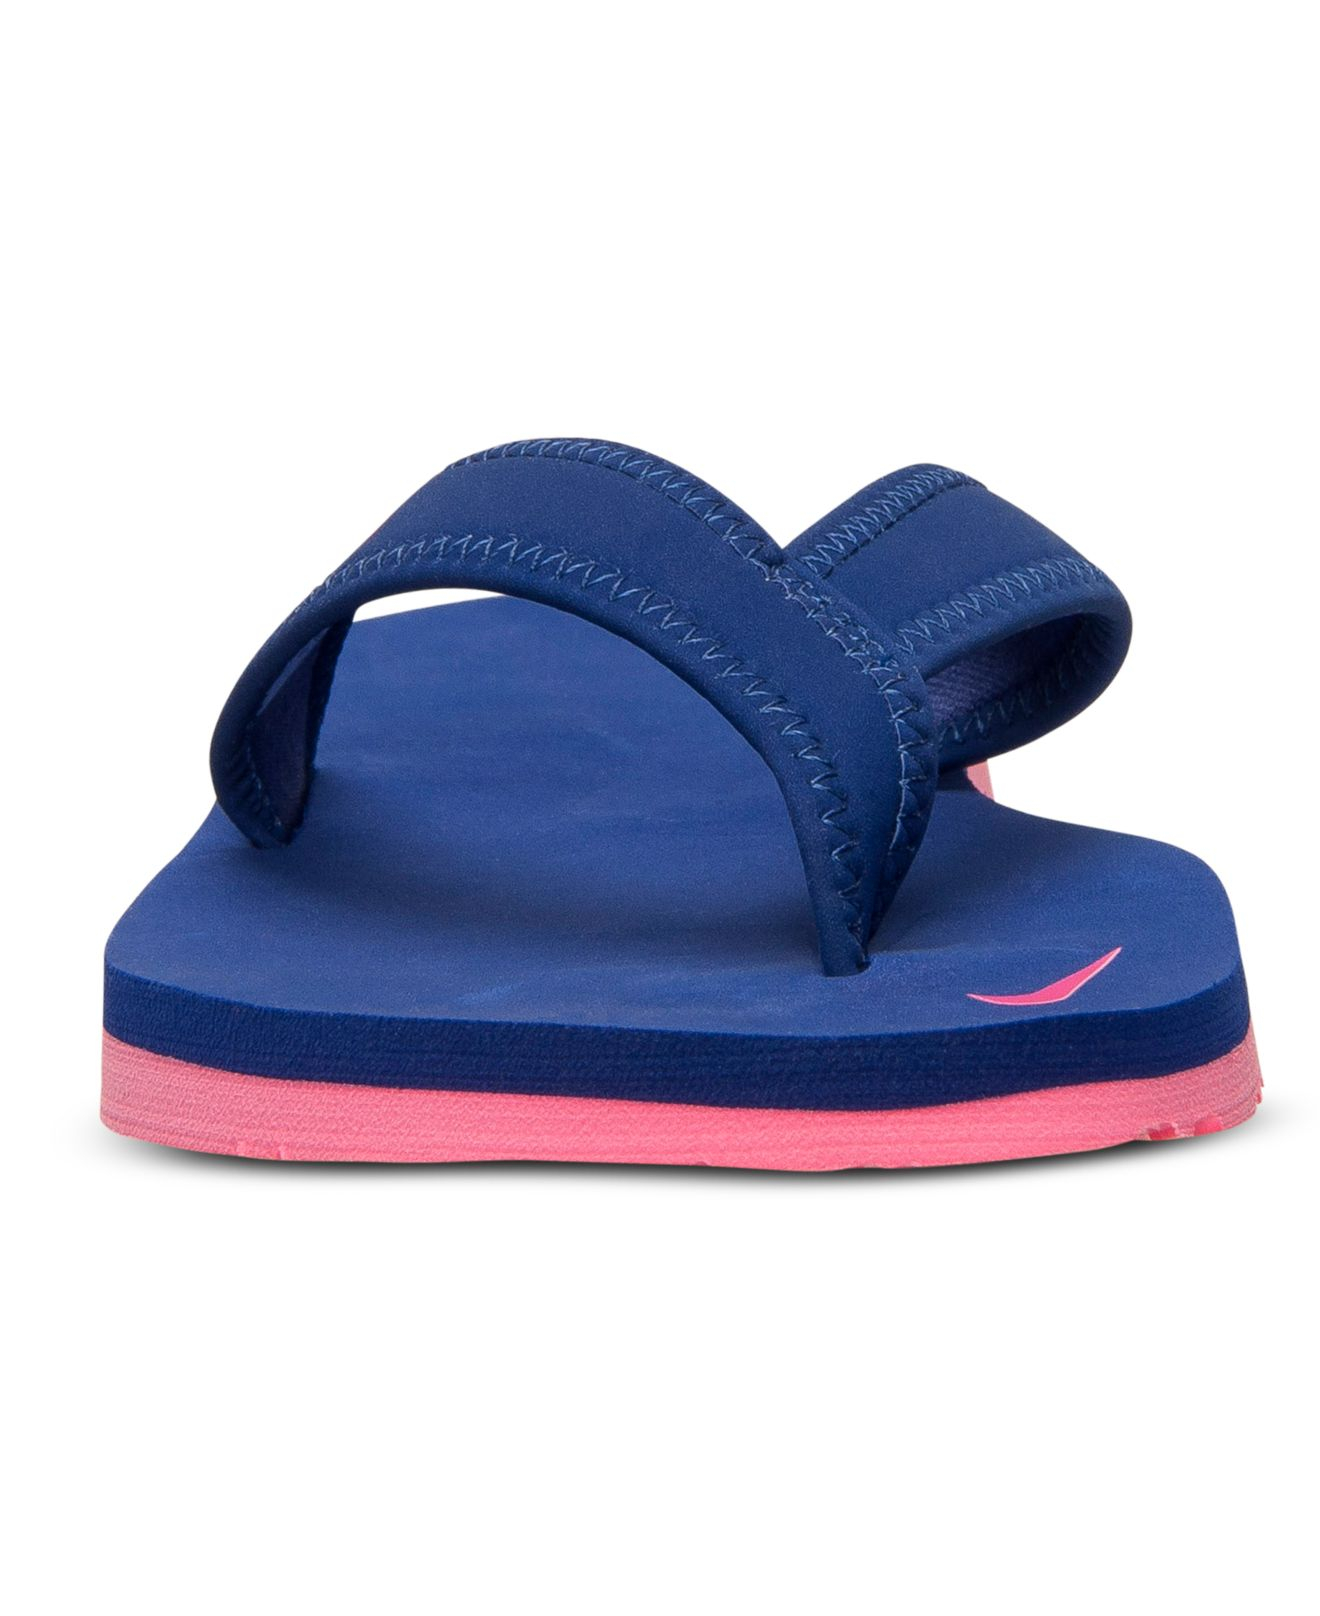 Nike Women's Celso Girl Thong Sandals From Finish Line in Blue | Lyst